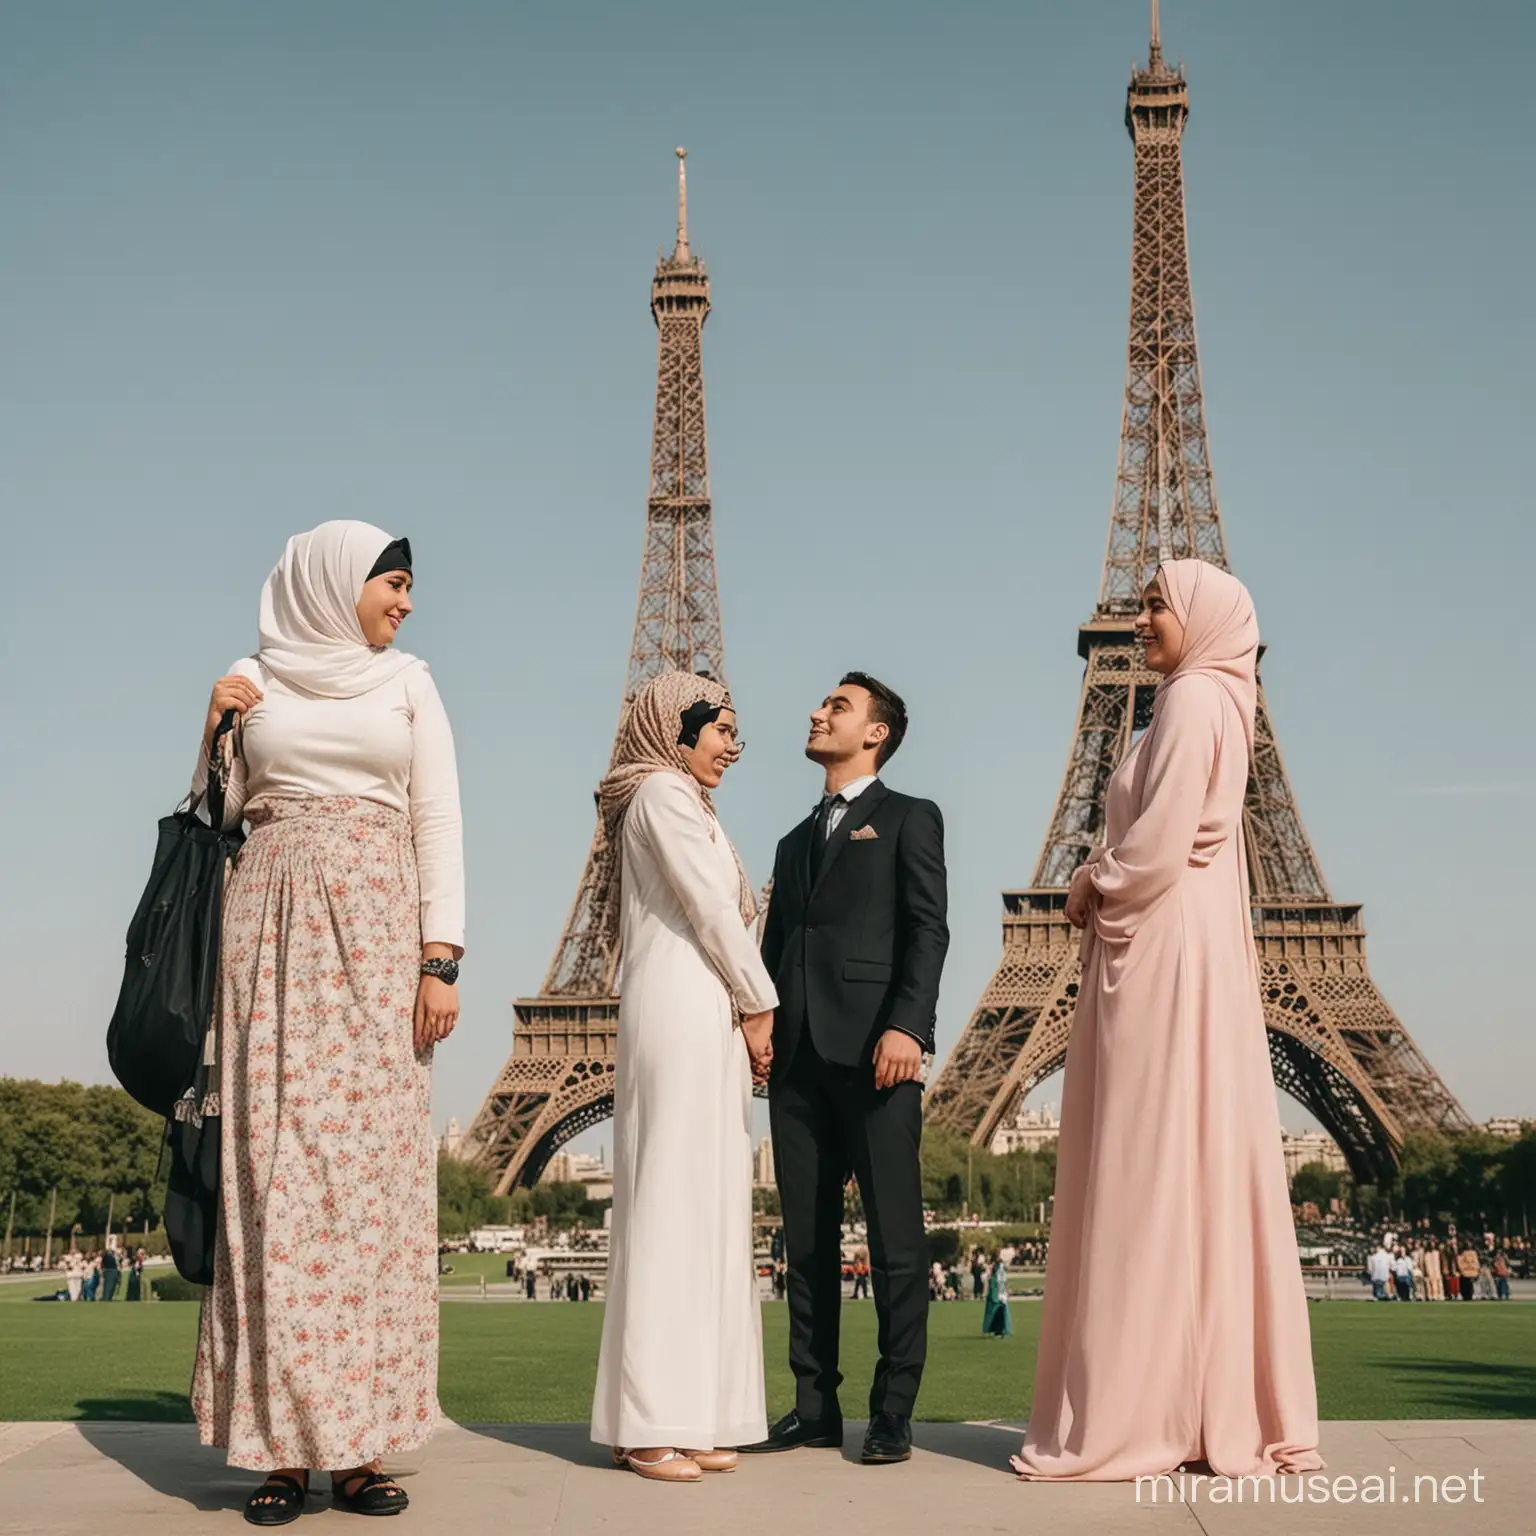 Diverse Couple in Hijab Admiring Eiffel Tower